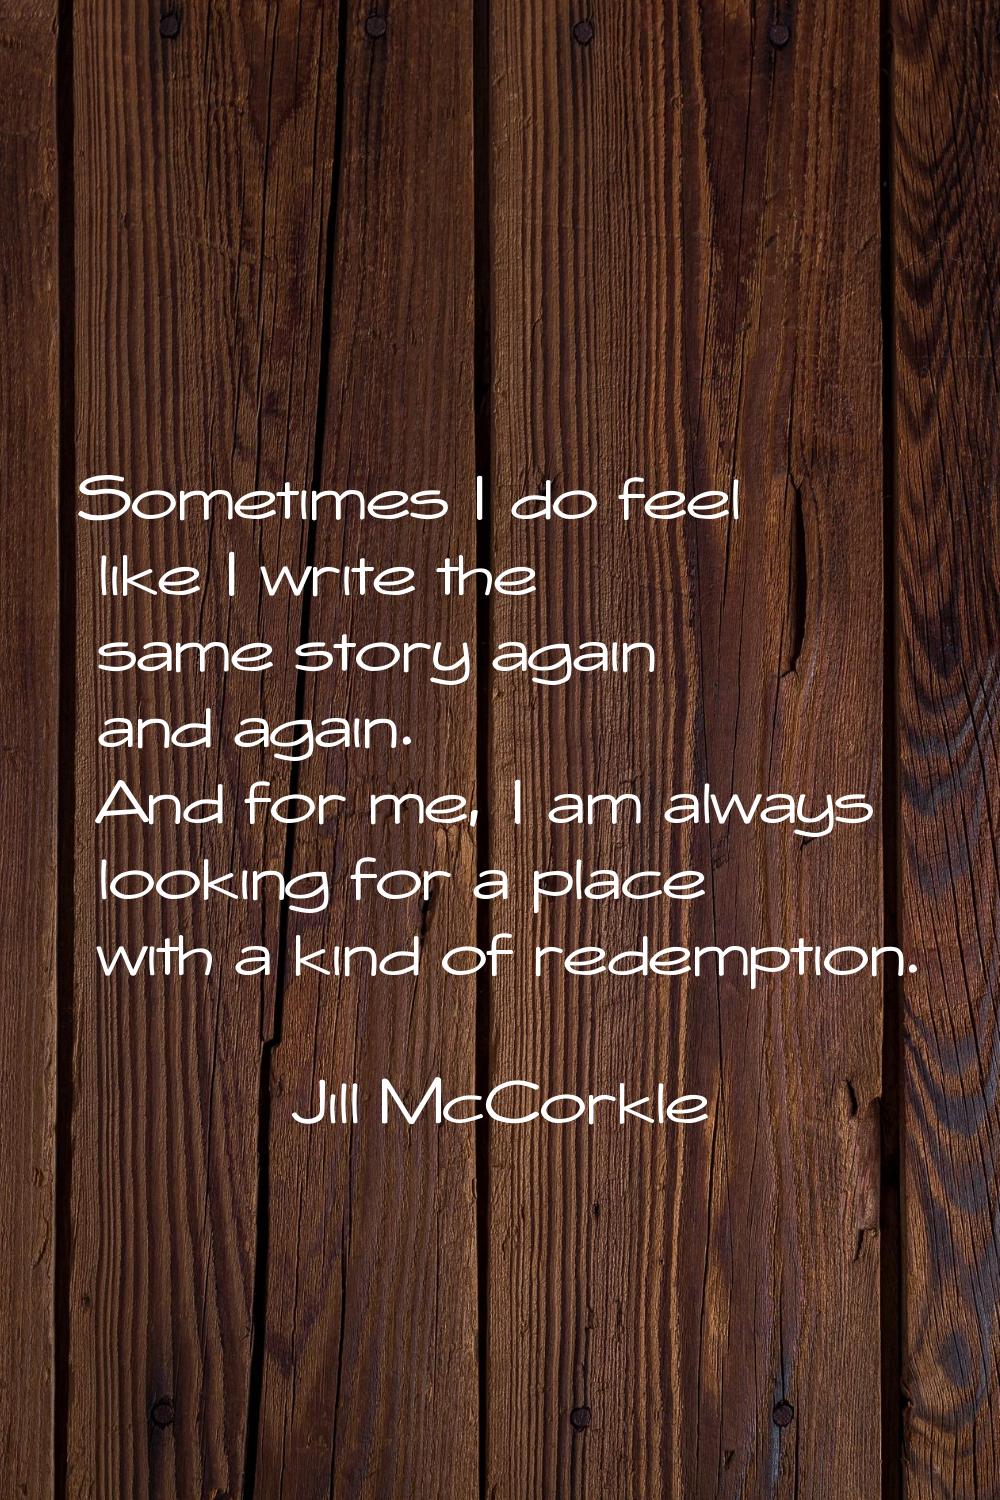 Sometimes I do feel like I write the same story again and again. And for me, I am always looking fo